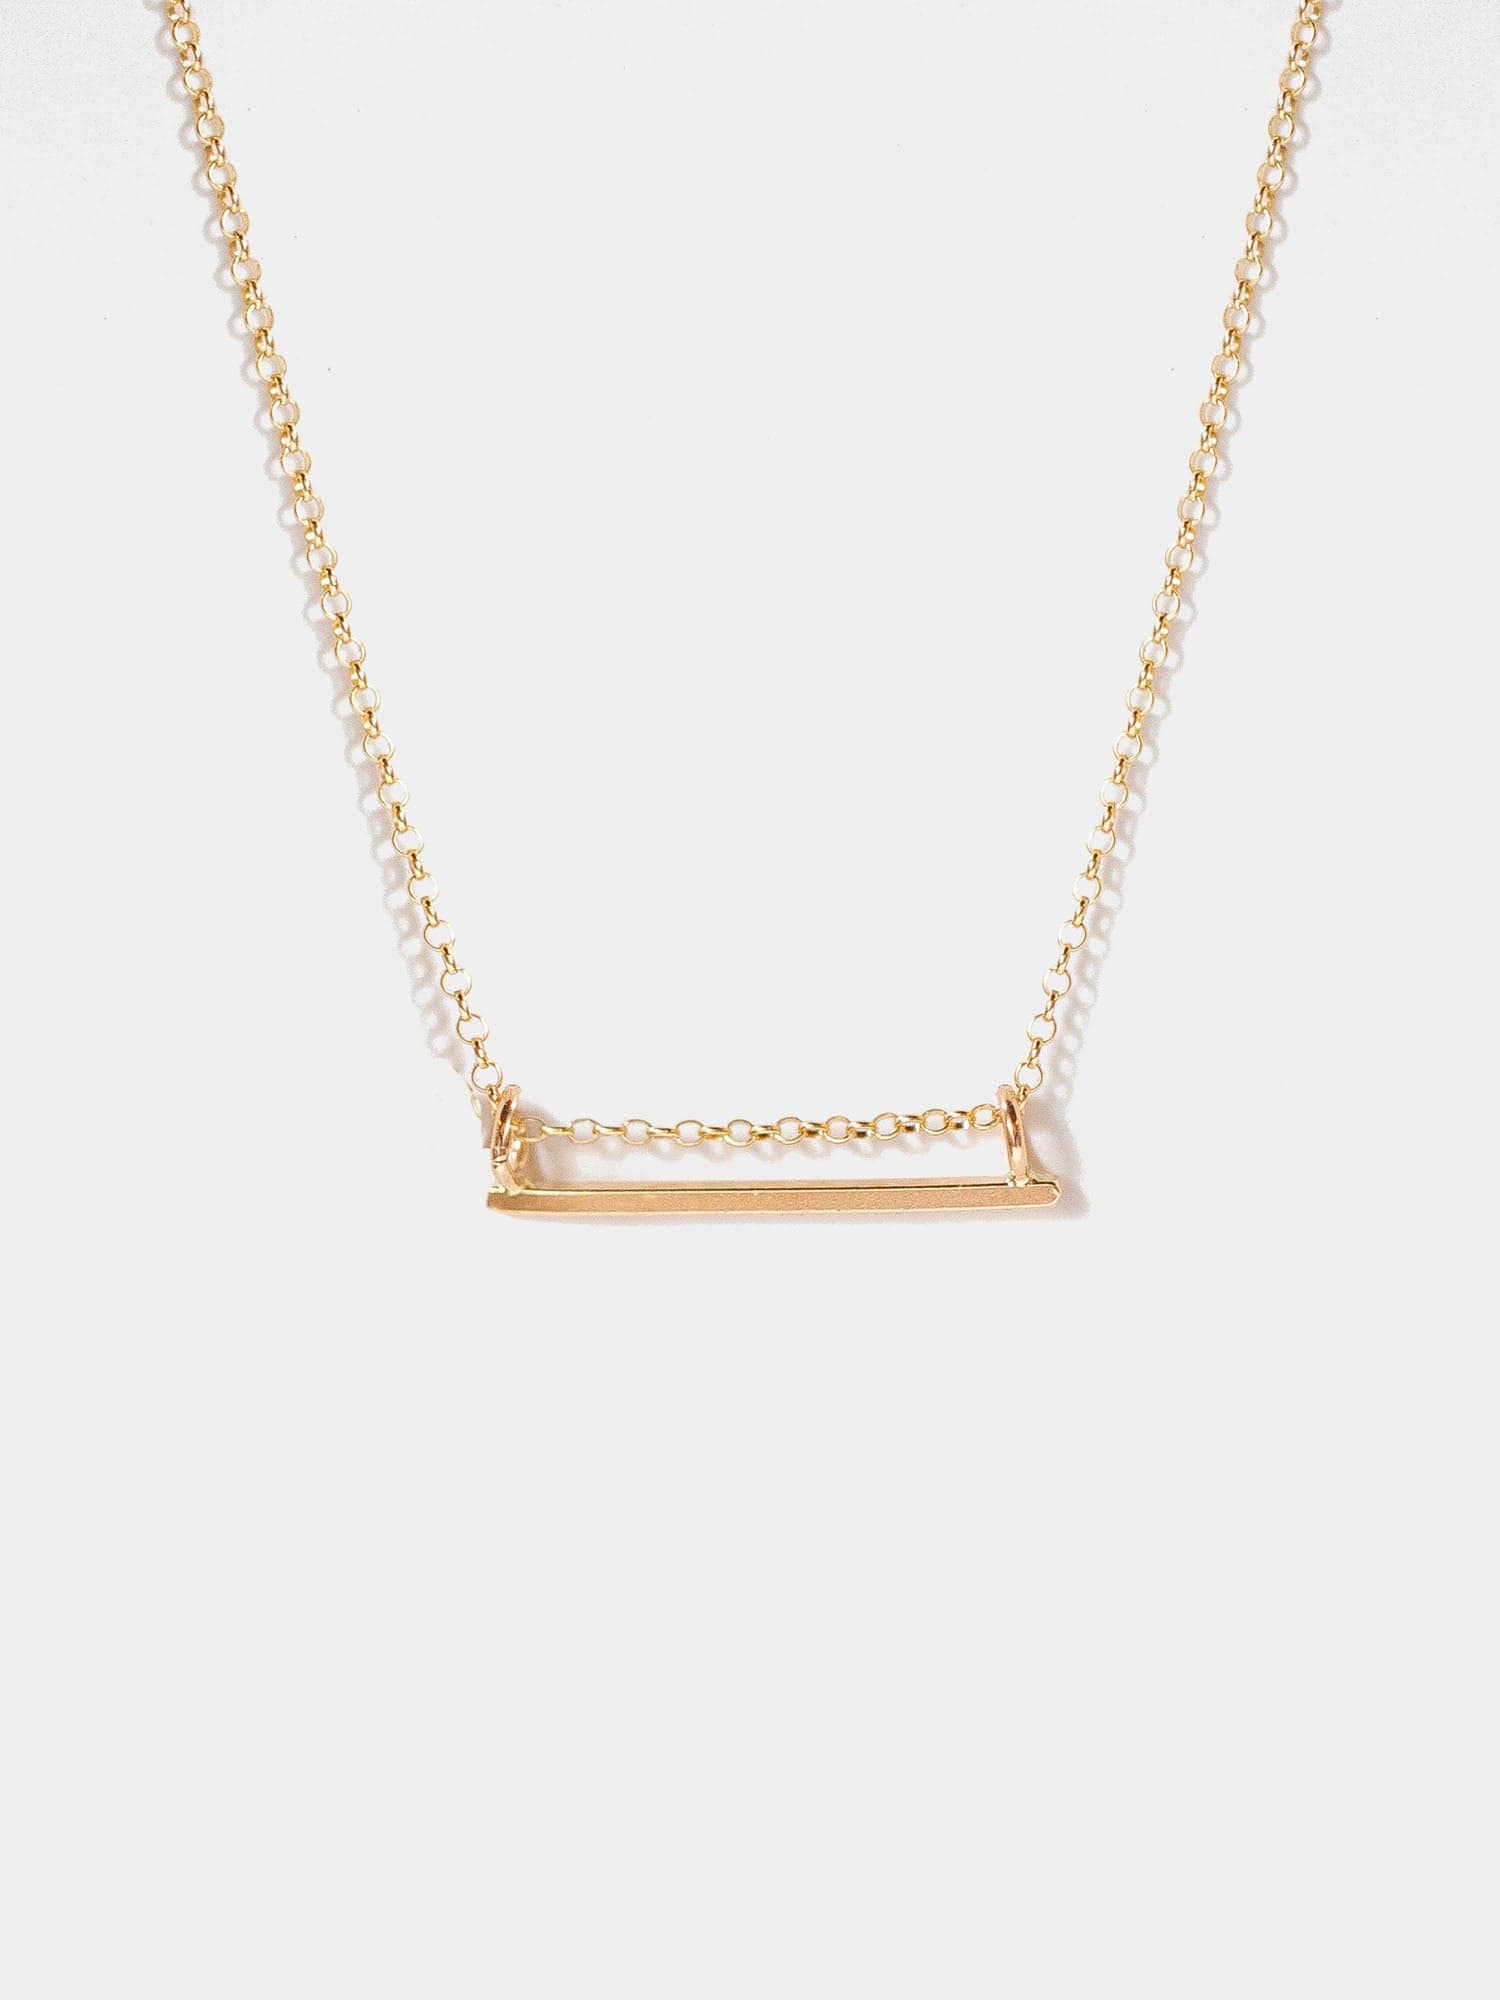 Shop OXB Necklaces Gold Filled / 16" Milestone Necklace